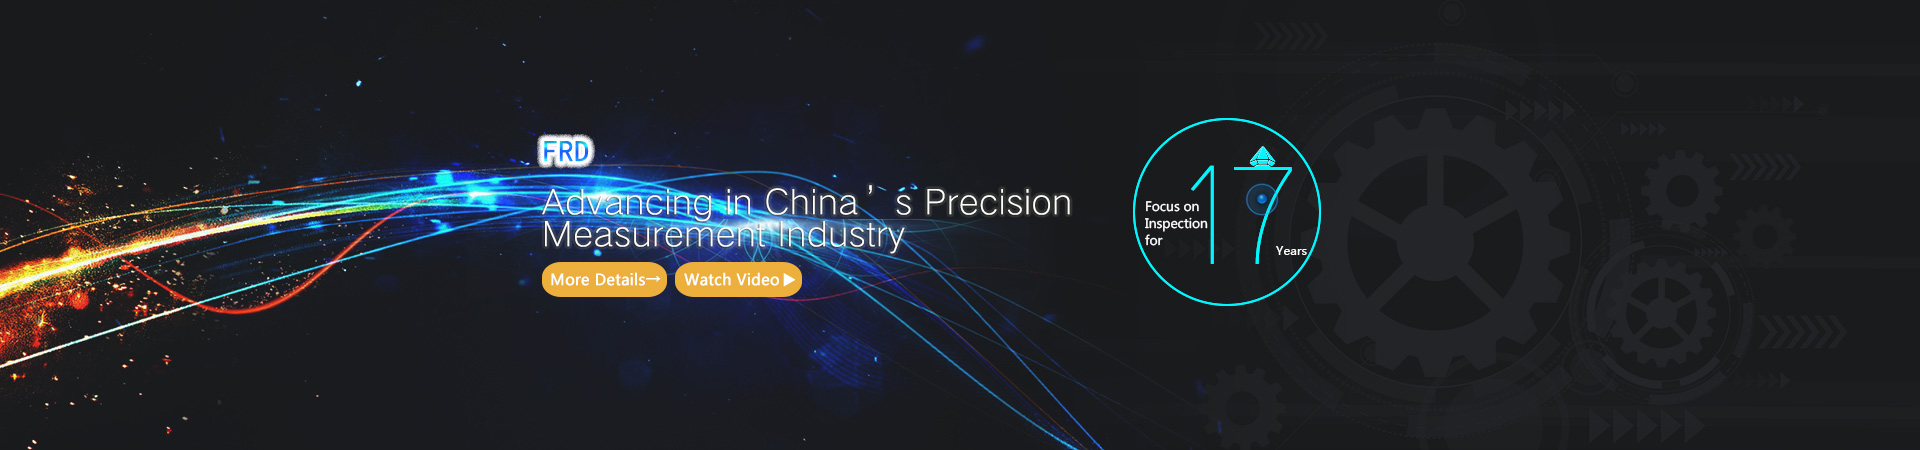 Advancing in China’s Precision Measurement Industry